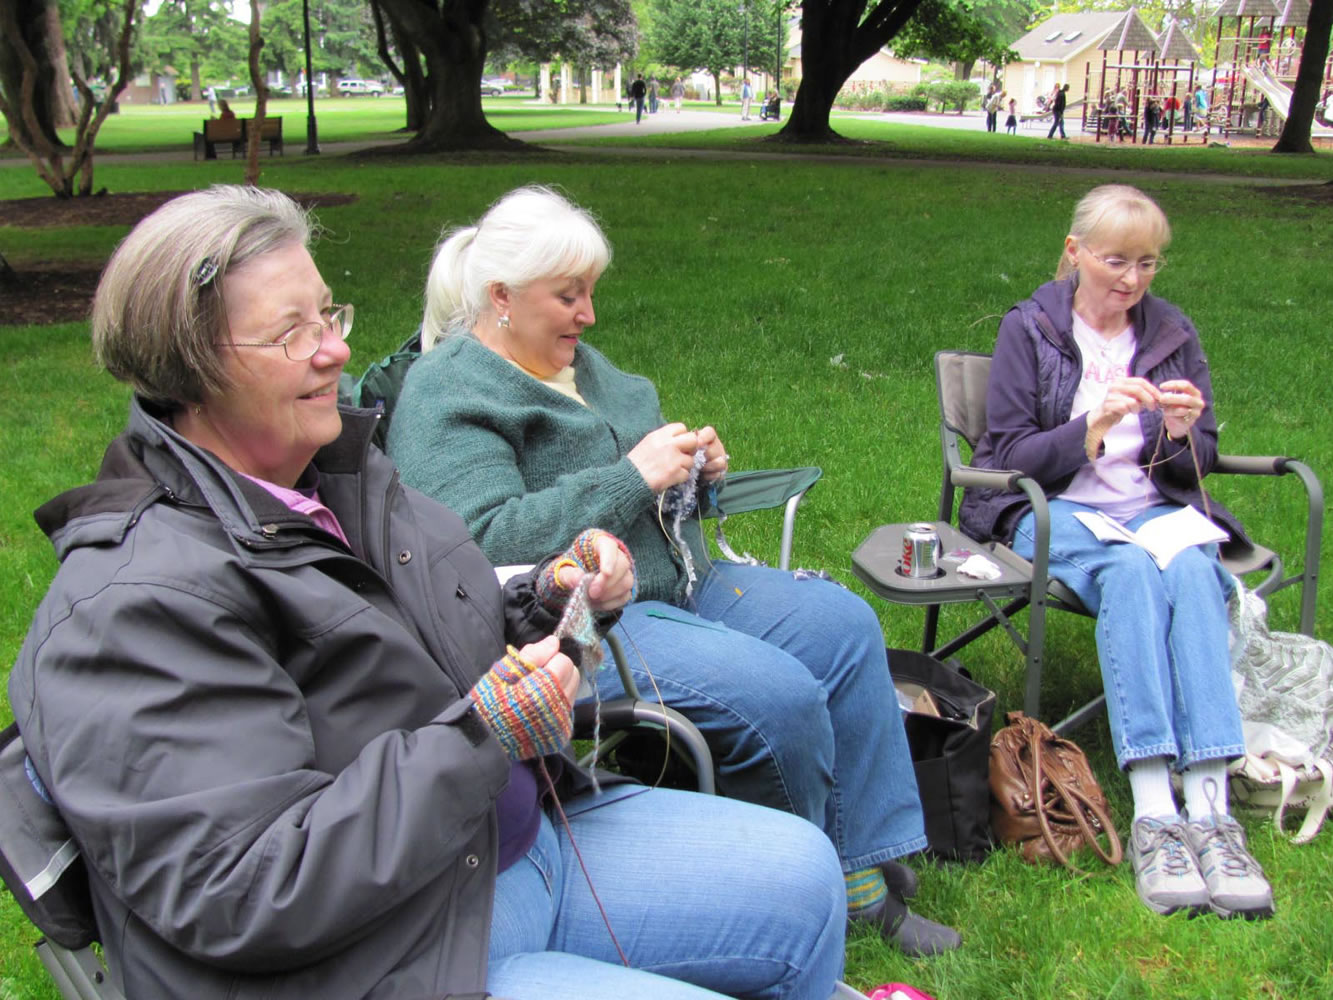 Esher Short Park: From left, Linda French Dawson, Fort Vancouver Knitters Guild president-elect Debra Cardiff and Sue Kuzma show off their knitting moves.